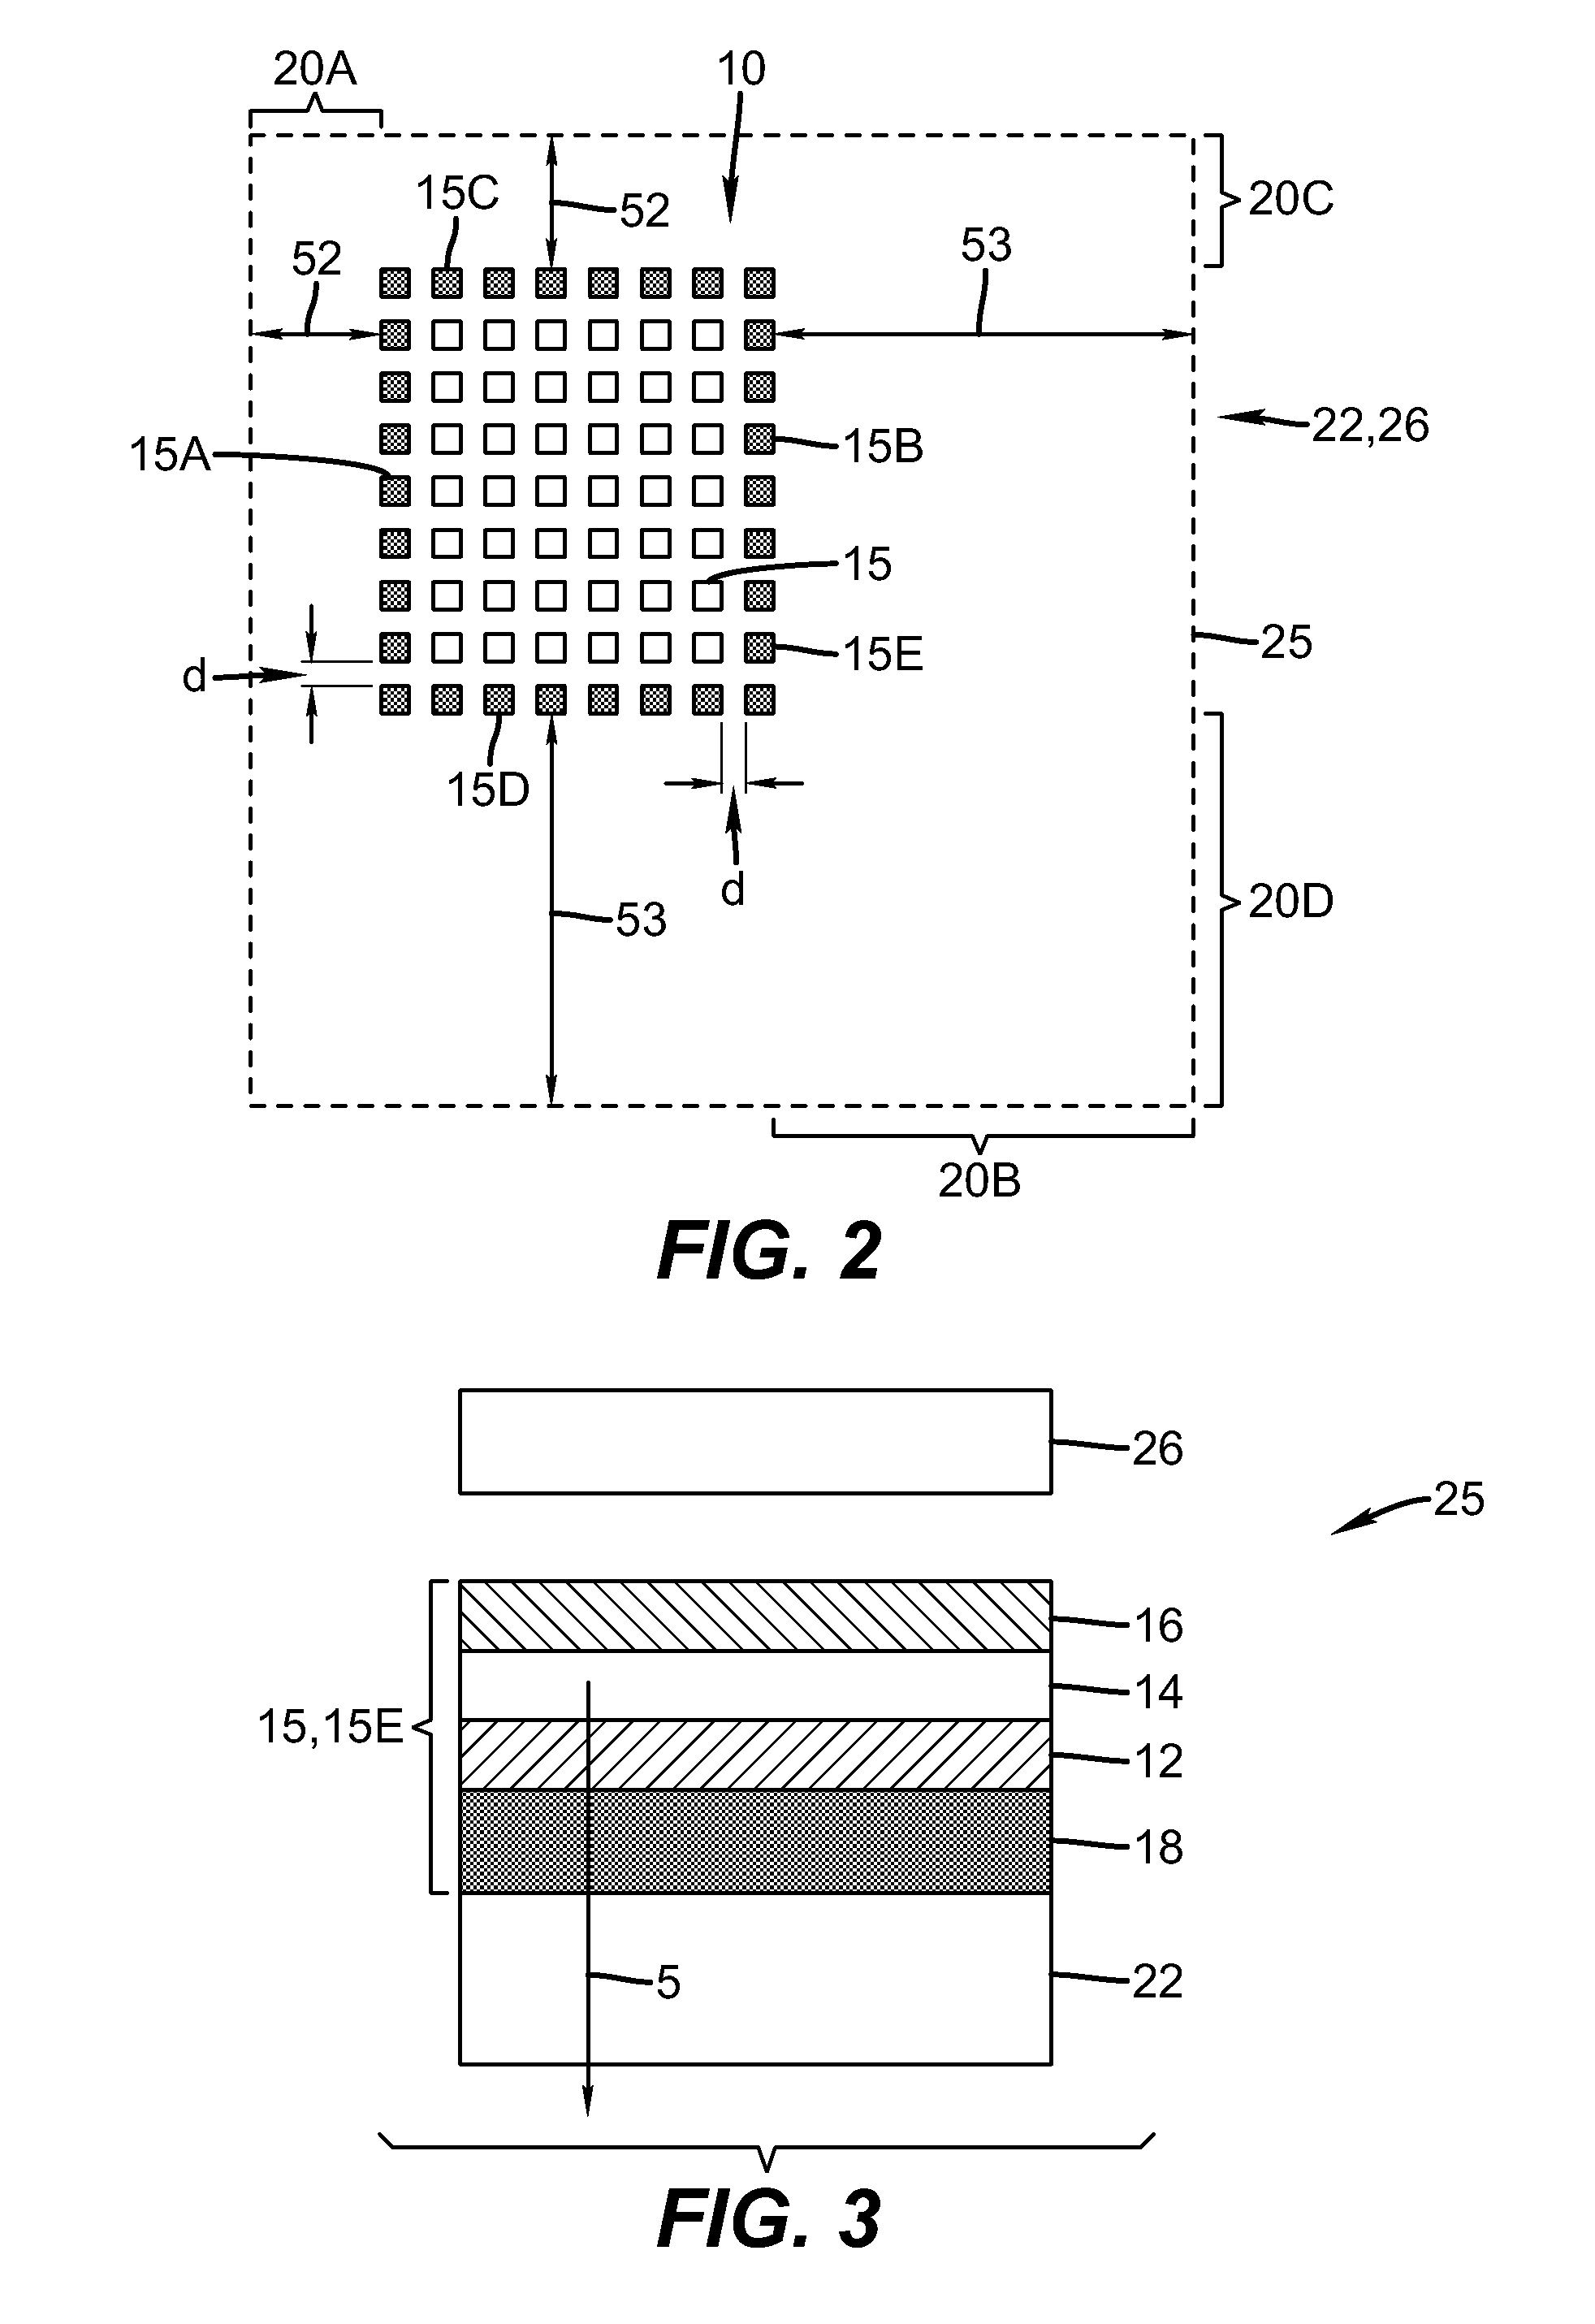 Tiled display with overlapping flexible substrates